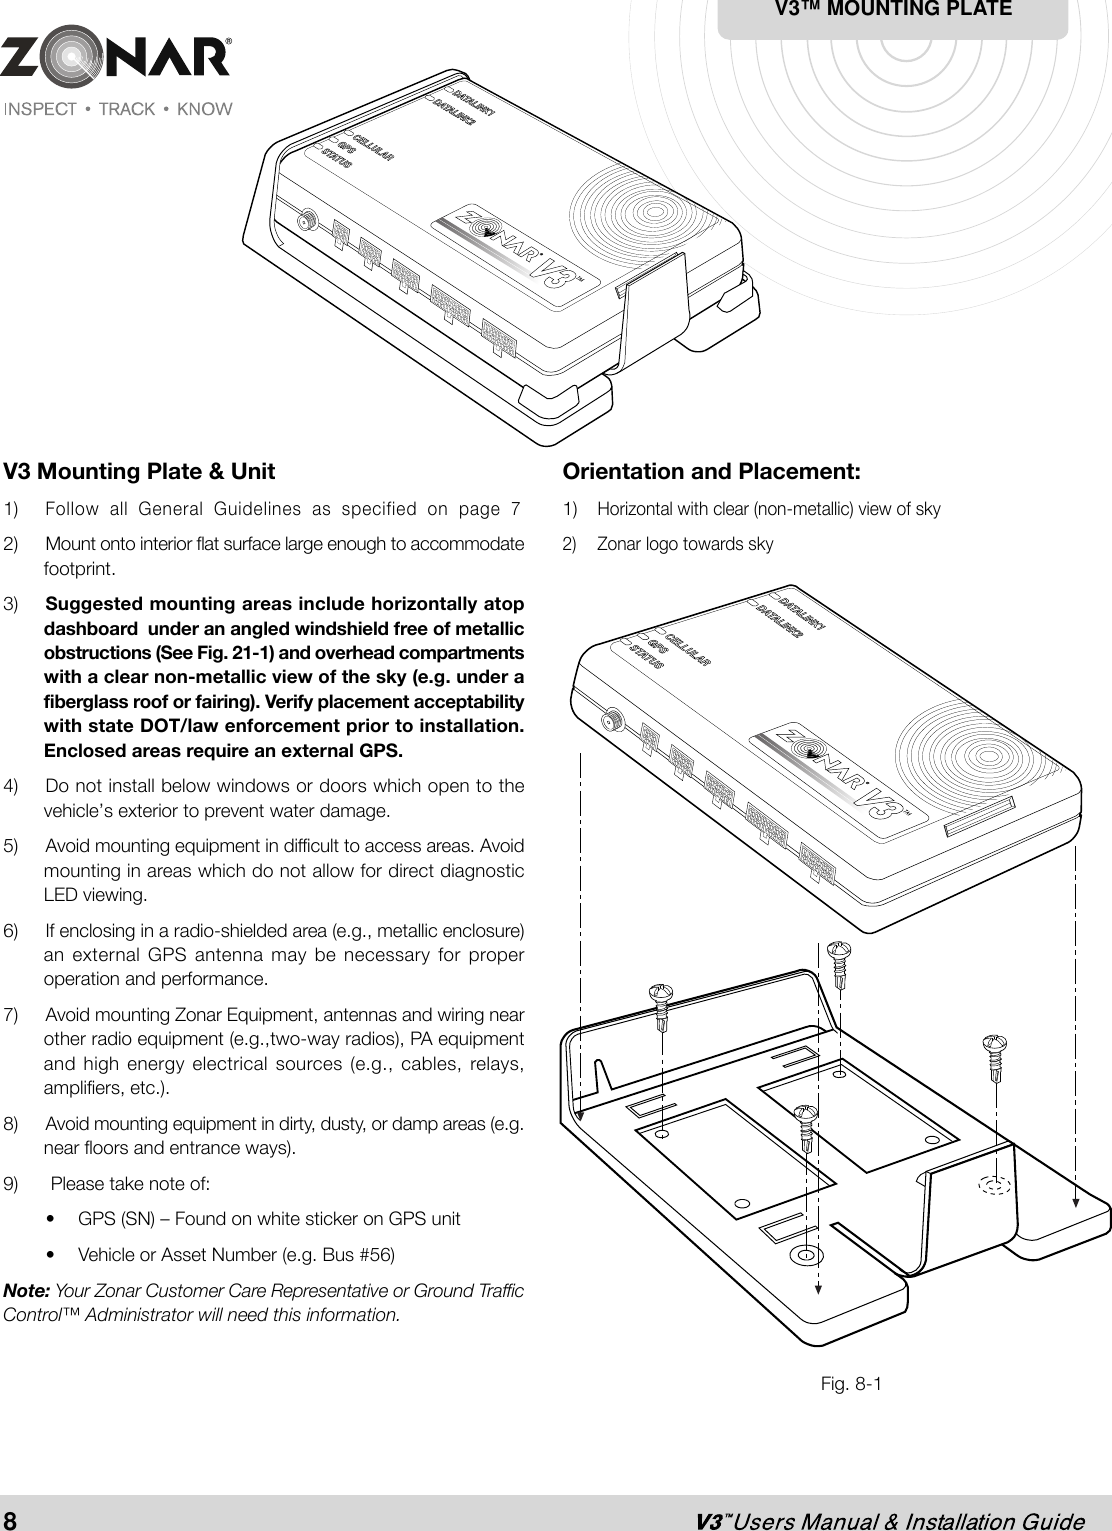 V3 Mounting Plate &amp; Unit1)Follow all General Guidelines as specified on page 72) Mount onto interior flat surface large enough to accommodatefootprint.3) Suggested mounting areas include horizontally atopdashboard  under an angled windshield free of metallicobstructions (See Fig. 21-1) and overhead compartmentswith a clear non-metallic view of the sky (e.g. under afiberglass roof or fairing). Verify placement acceptabilitywith state DOT/law enforcement prior to installation.Enclosed areas require an external GPS.4) Do not install below windows or doors which open to thevehicle’s exterior to prevent water damage.5) Avoid mounting equipment in difficult to access areas. Avoidmounting in areas which do not allow for direct diagnosticLED viewing.6)  If enclosing in a radio-shielded area (e.g., metallic enclosure)an external GPS antenna may be necessary for properoperation and performance.7) Avoid mounting Zonar Equipment, antennas and wiring nearother radio equipment (e.g.,two-way radios), PA equipmentand high energy electrical sources (e.g., cables, relays,amplifiers, etc.).8) Avoid mounting equipment in dirty, dusty, or damp areas (e.g.near floors and entrance ways).9)  Please take note of:• GPS (SN) – Found on white sticker on GPS unit• Vehicle or Asset Number (e.g. Bus #56)Note: Your Zonar Customer Care Representative or Ground TrafficControl™ Administrator will need this information.Fig. 8-1Orientation and Placement:1)Horizontal with clear (non-metallic) view of sky2) Zonar logo towards skyV3™ MOUNTING PLATE8